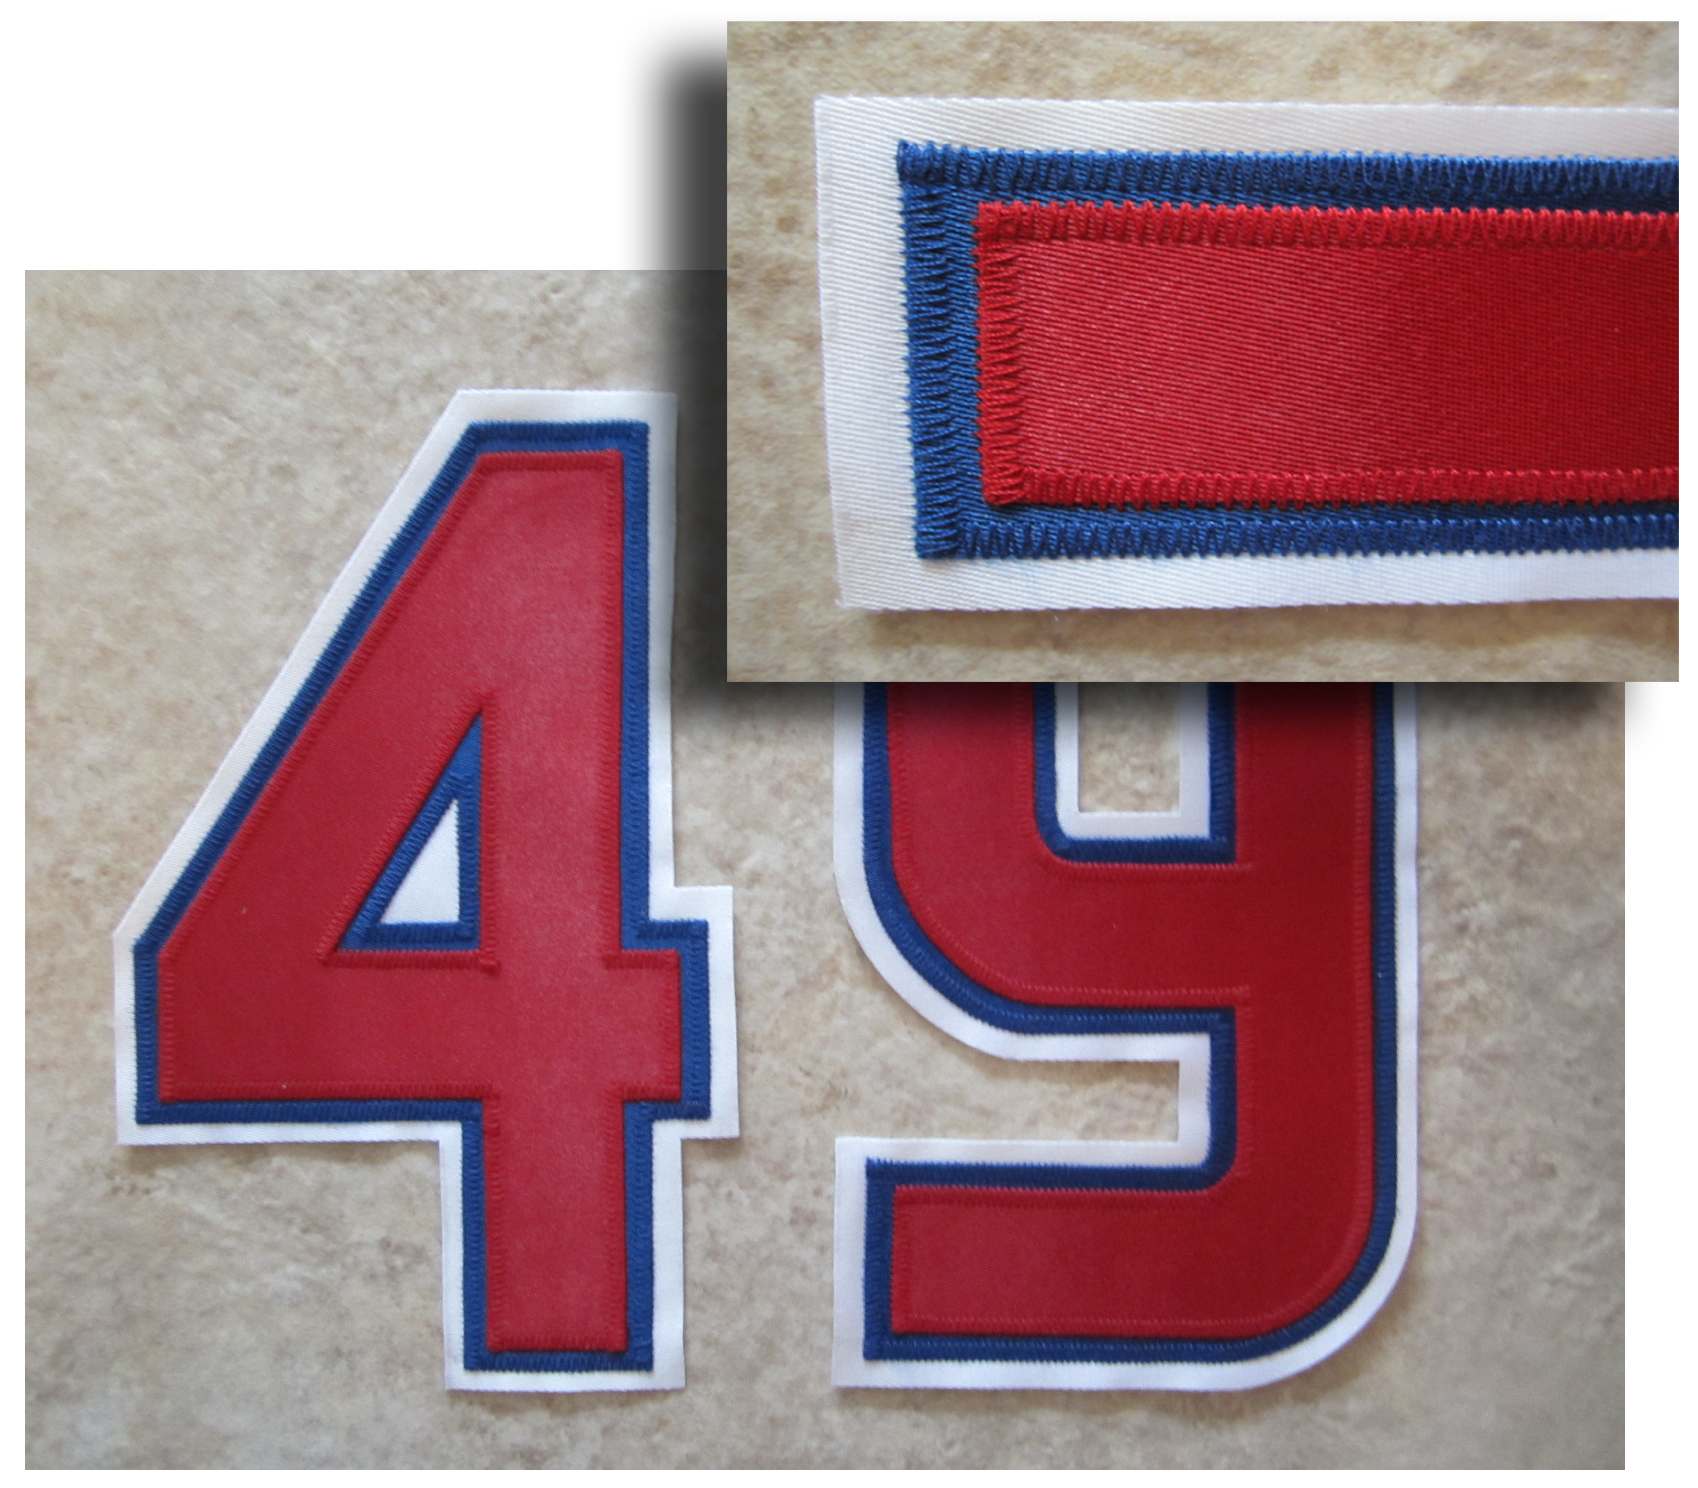 sew on numbers for sports jerseys